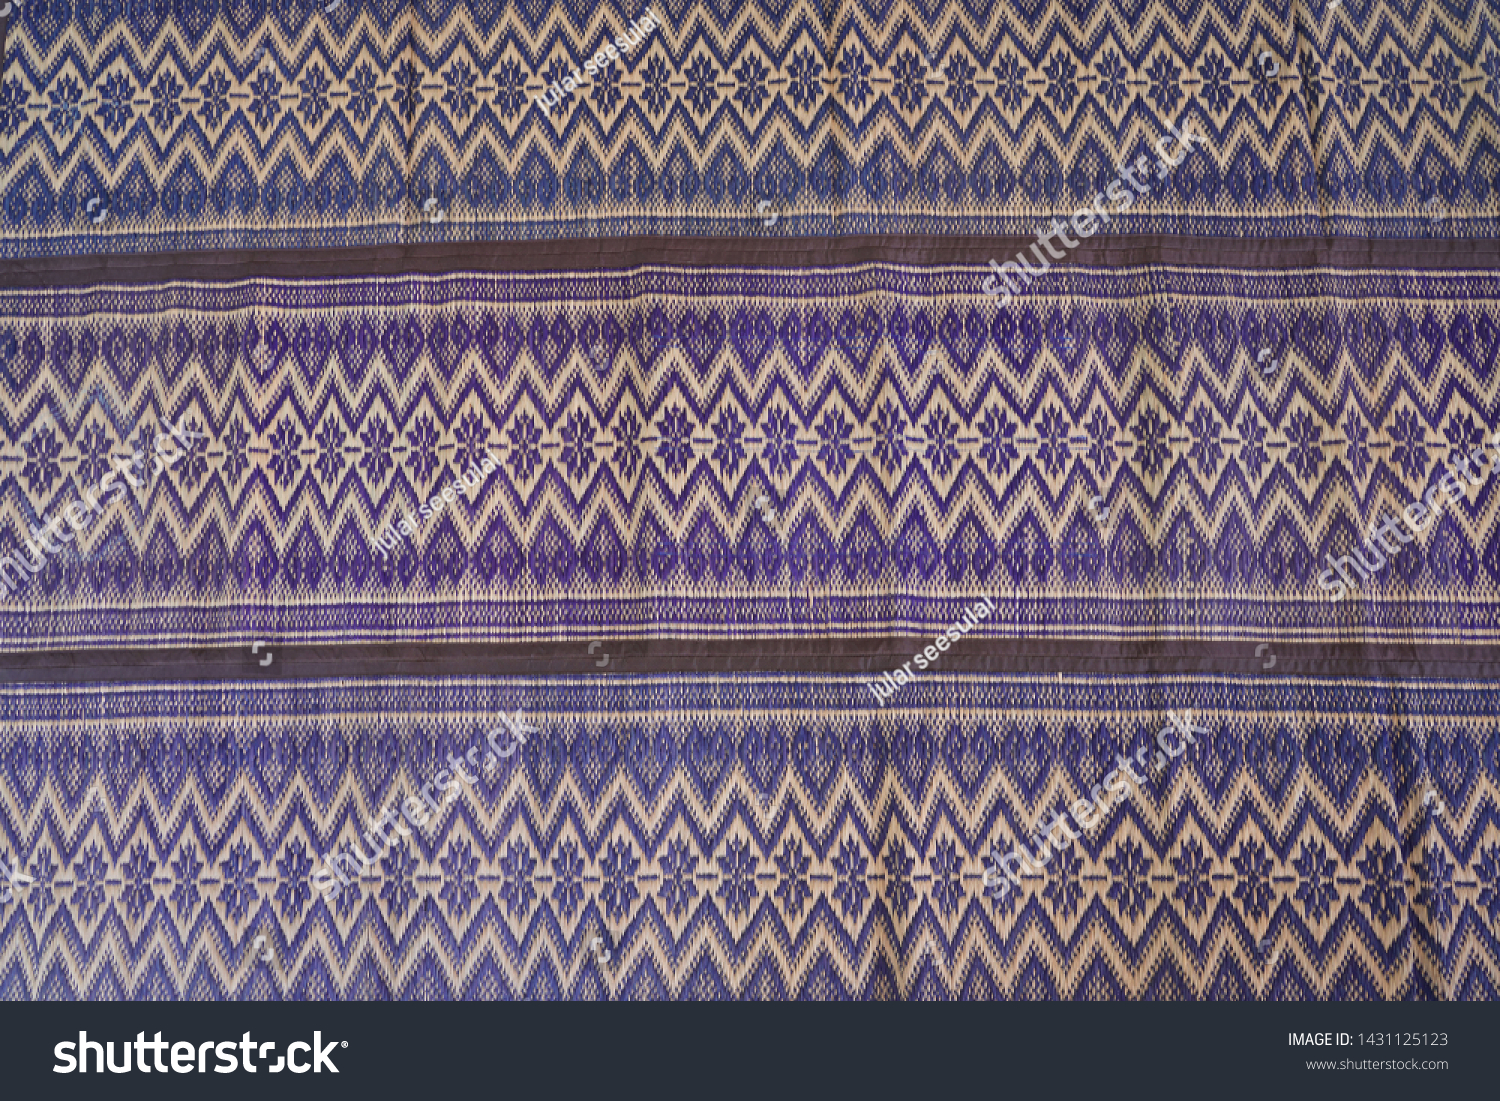 The reed mat brings the papyrus to be transformed into a dyeing line, then woven into a traditional pattern or a patterned pattern with many patterns. To be a sheet Bring to sit, sit or sleep #1431125123